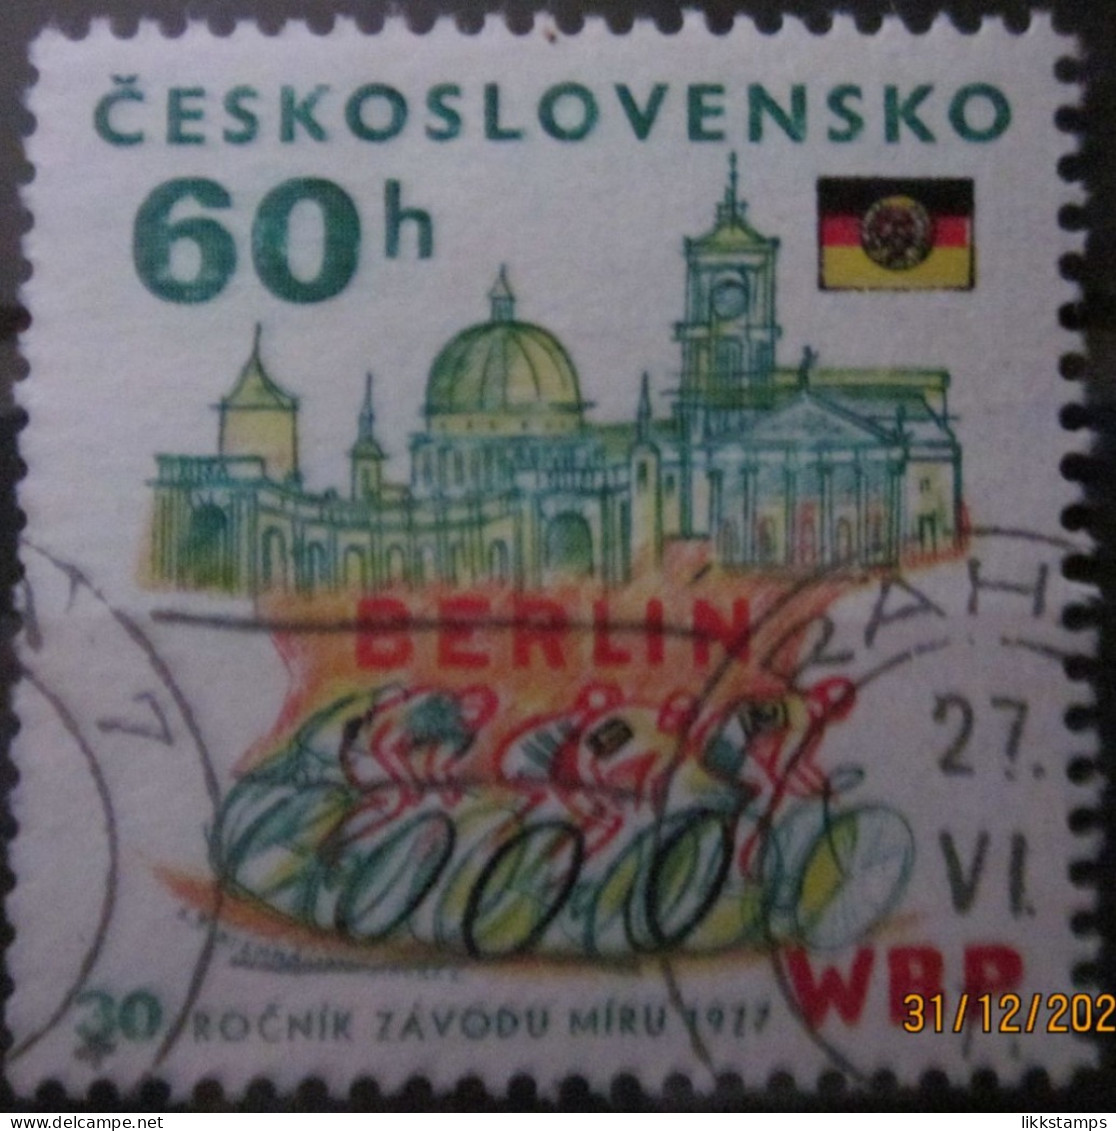 CZECHOSLOVAKIA 1977 ~ S.G. 2333, ~ THE 30th ANNIVERSARY OF THE PEACE CYCLE RACE. ~ VFU #03195 - Used Stamps